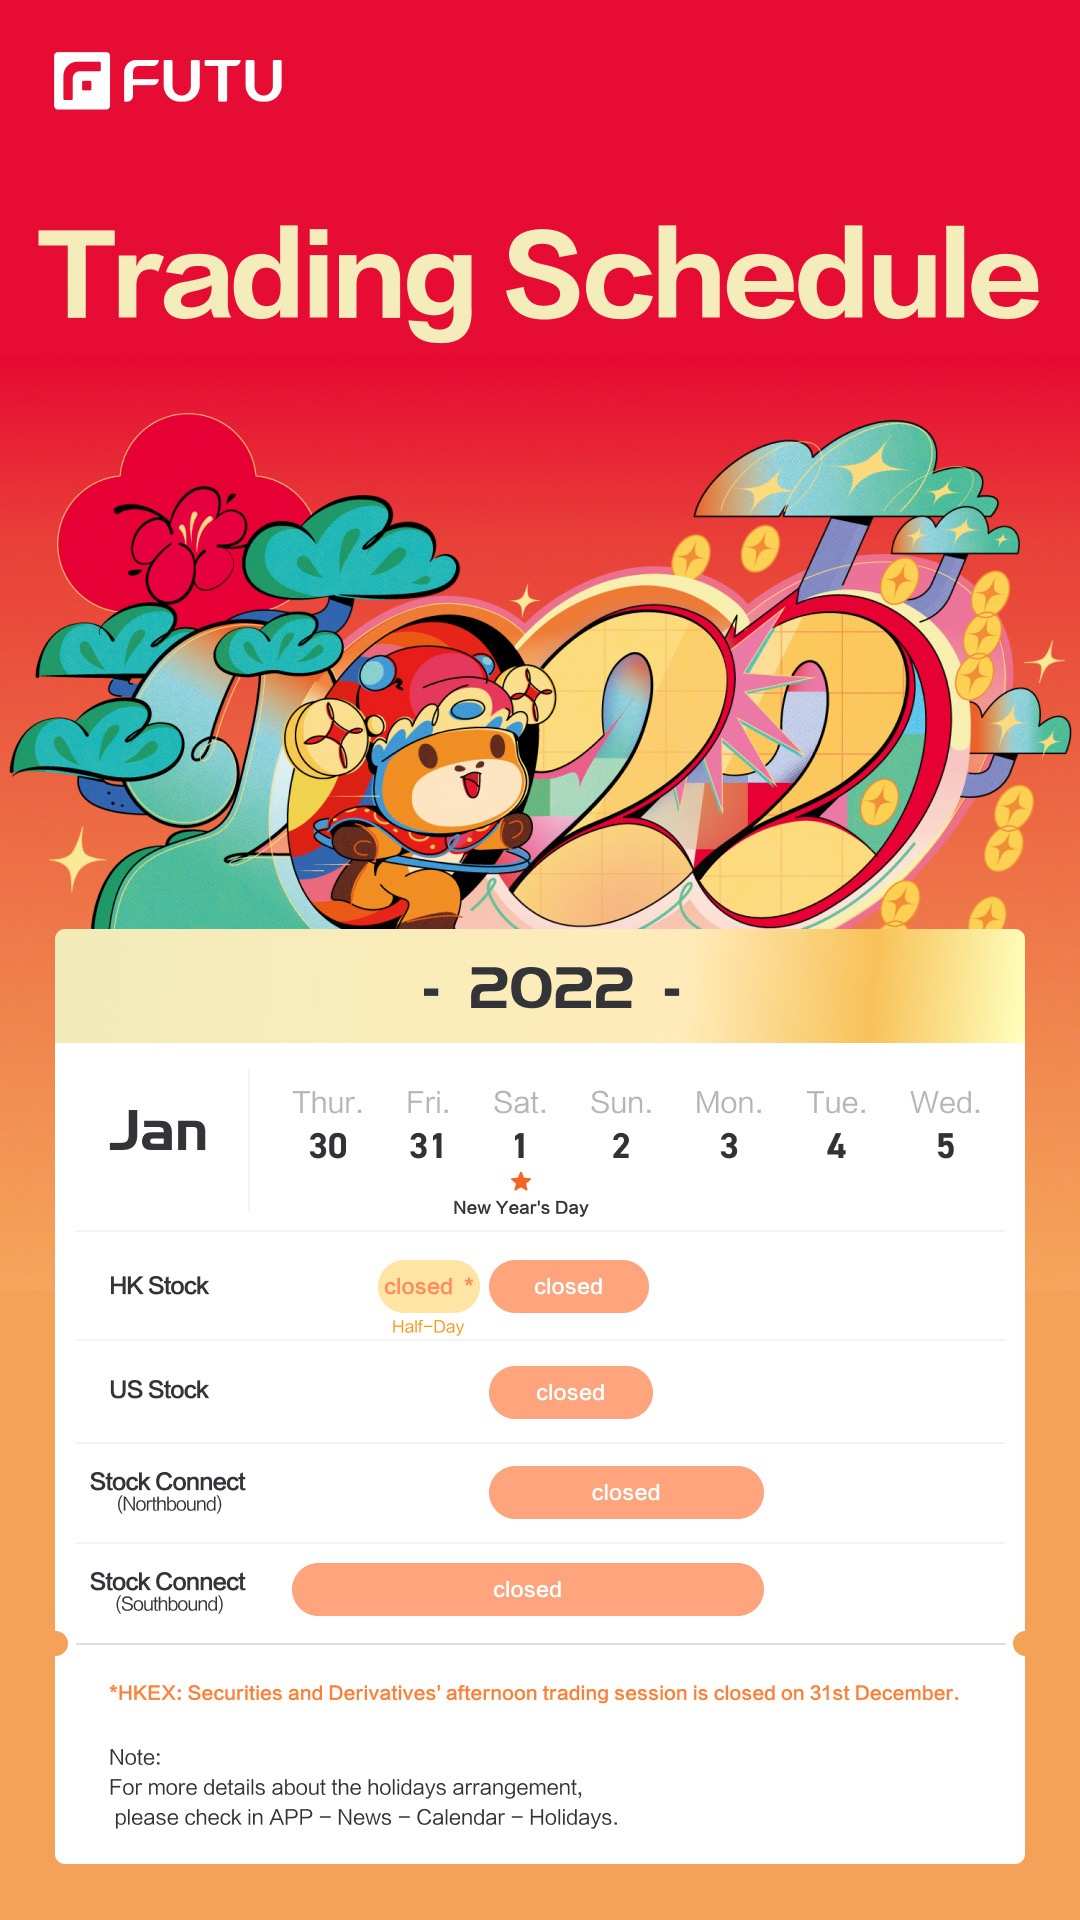 2022 is comming！